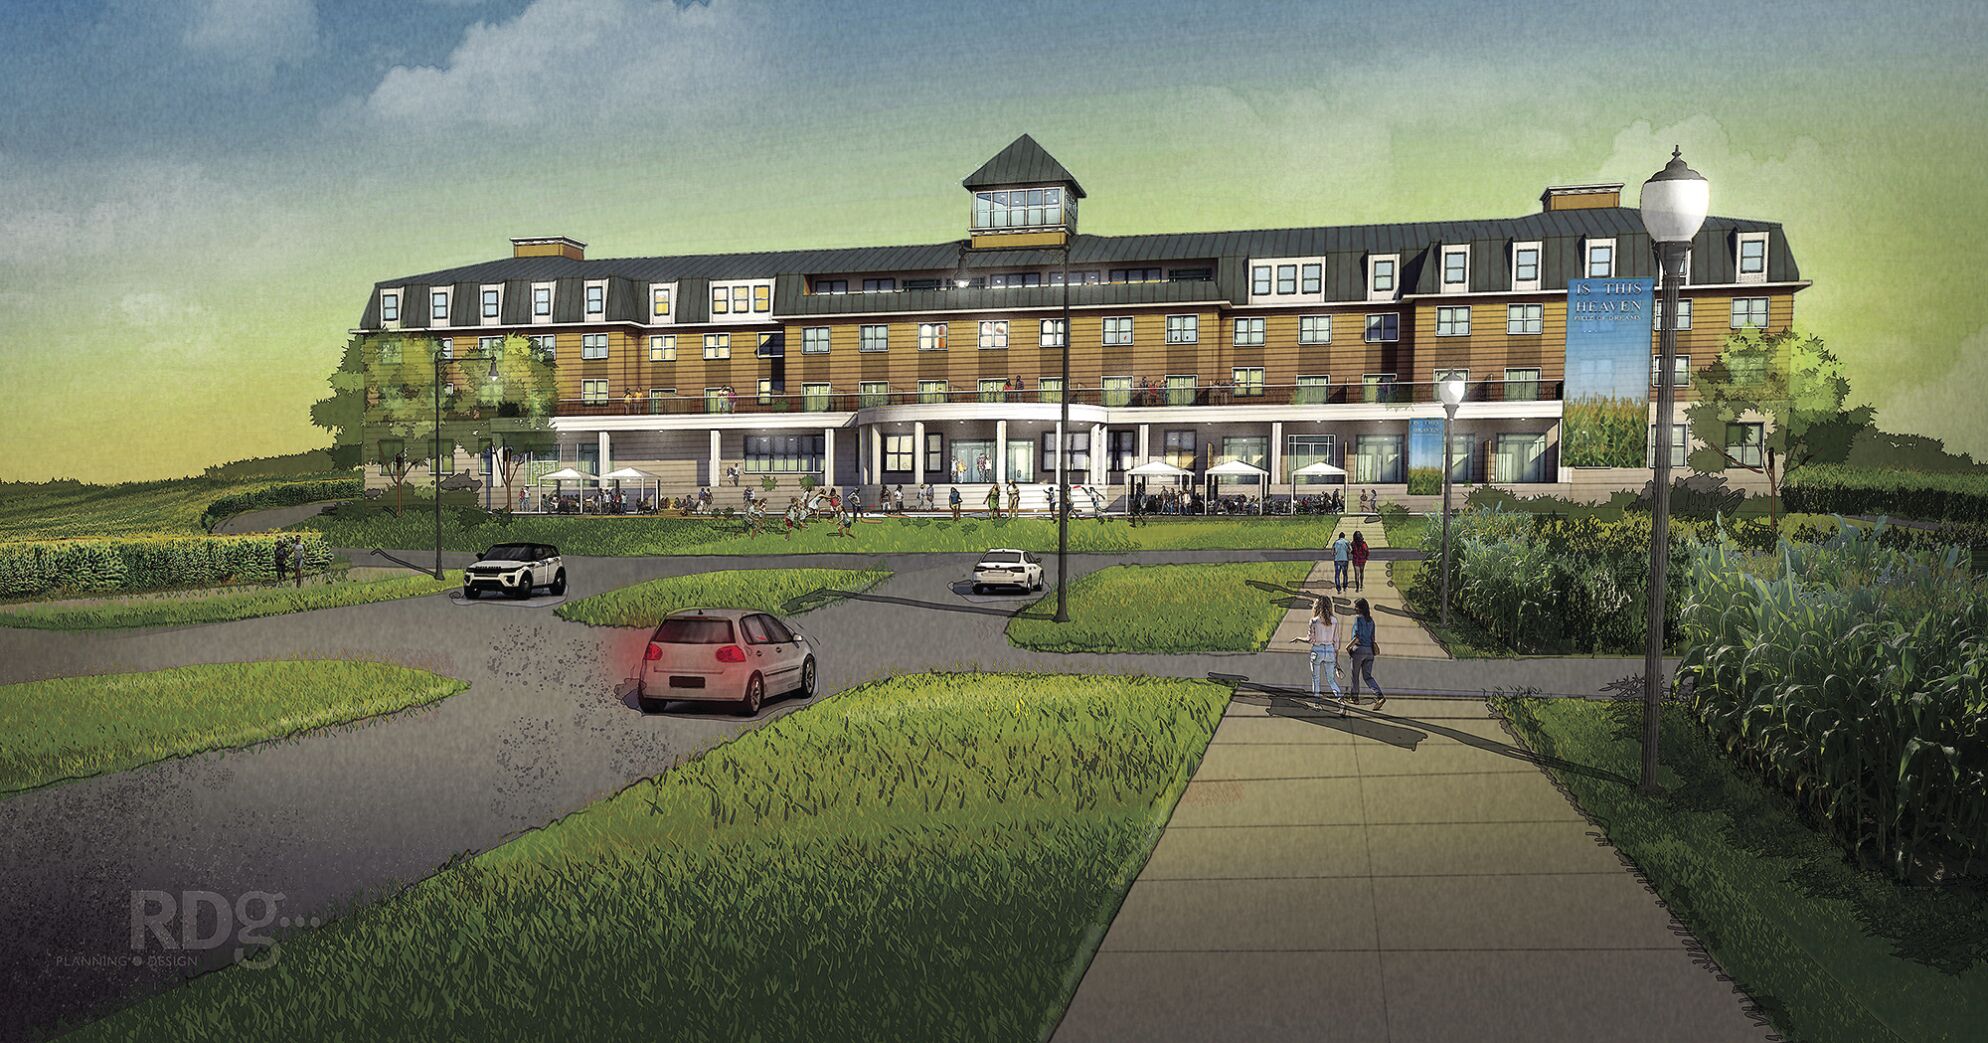 A rendering shows the Field of Dreams hotel that will be part of an $80 million expansion to the Dyersville, Iowa, movie site.    PHOTO CREDIT: Courtesy of RDG Planning & Design